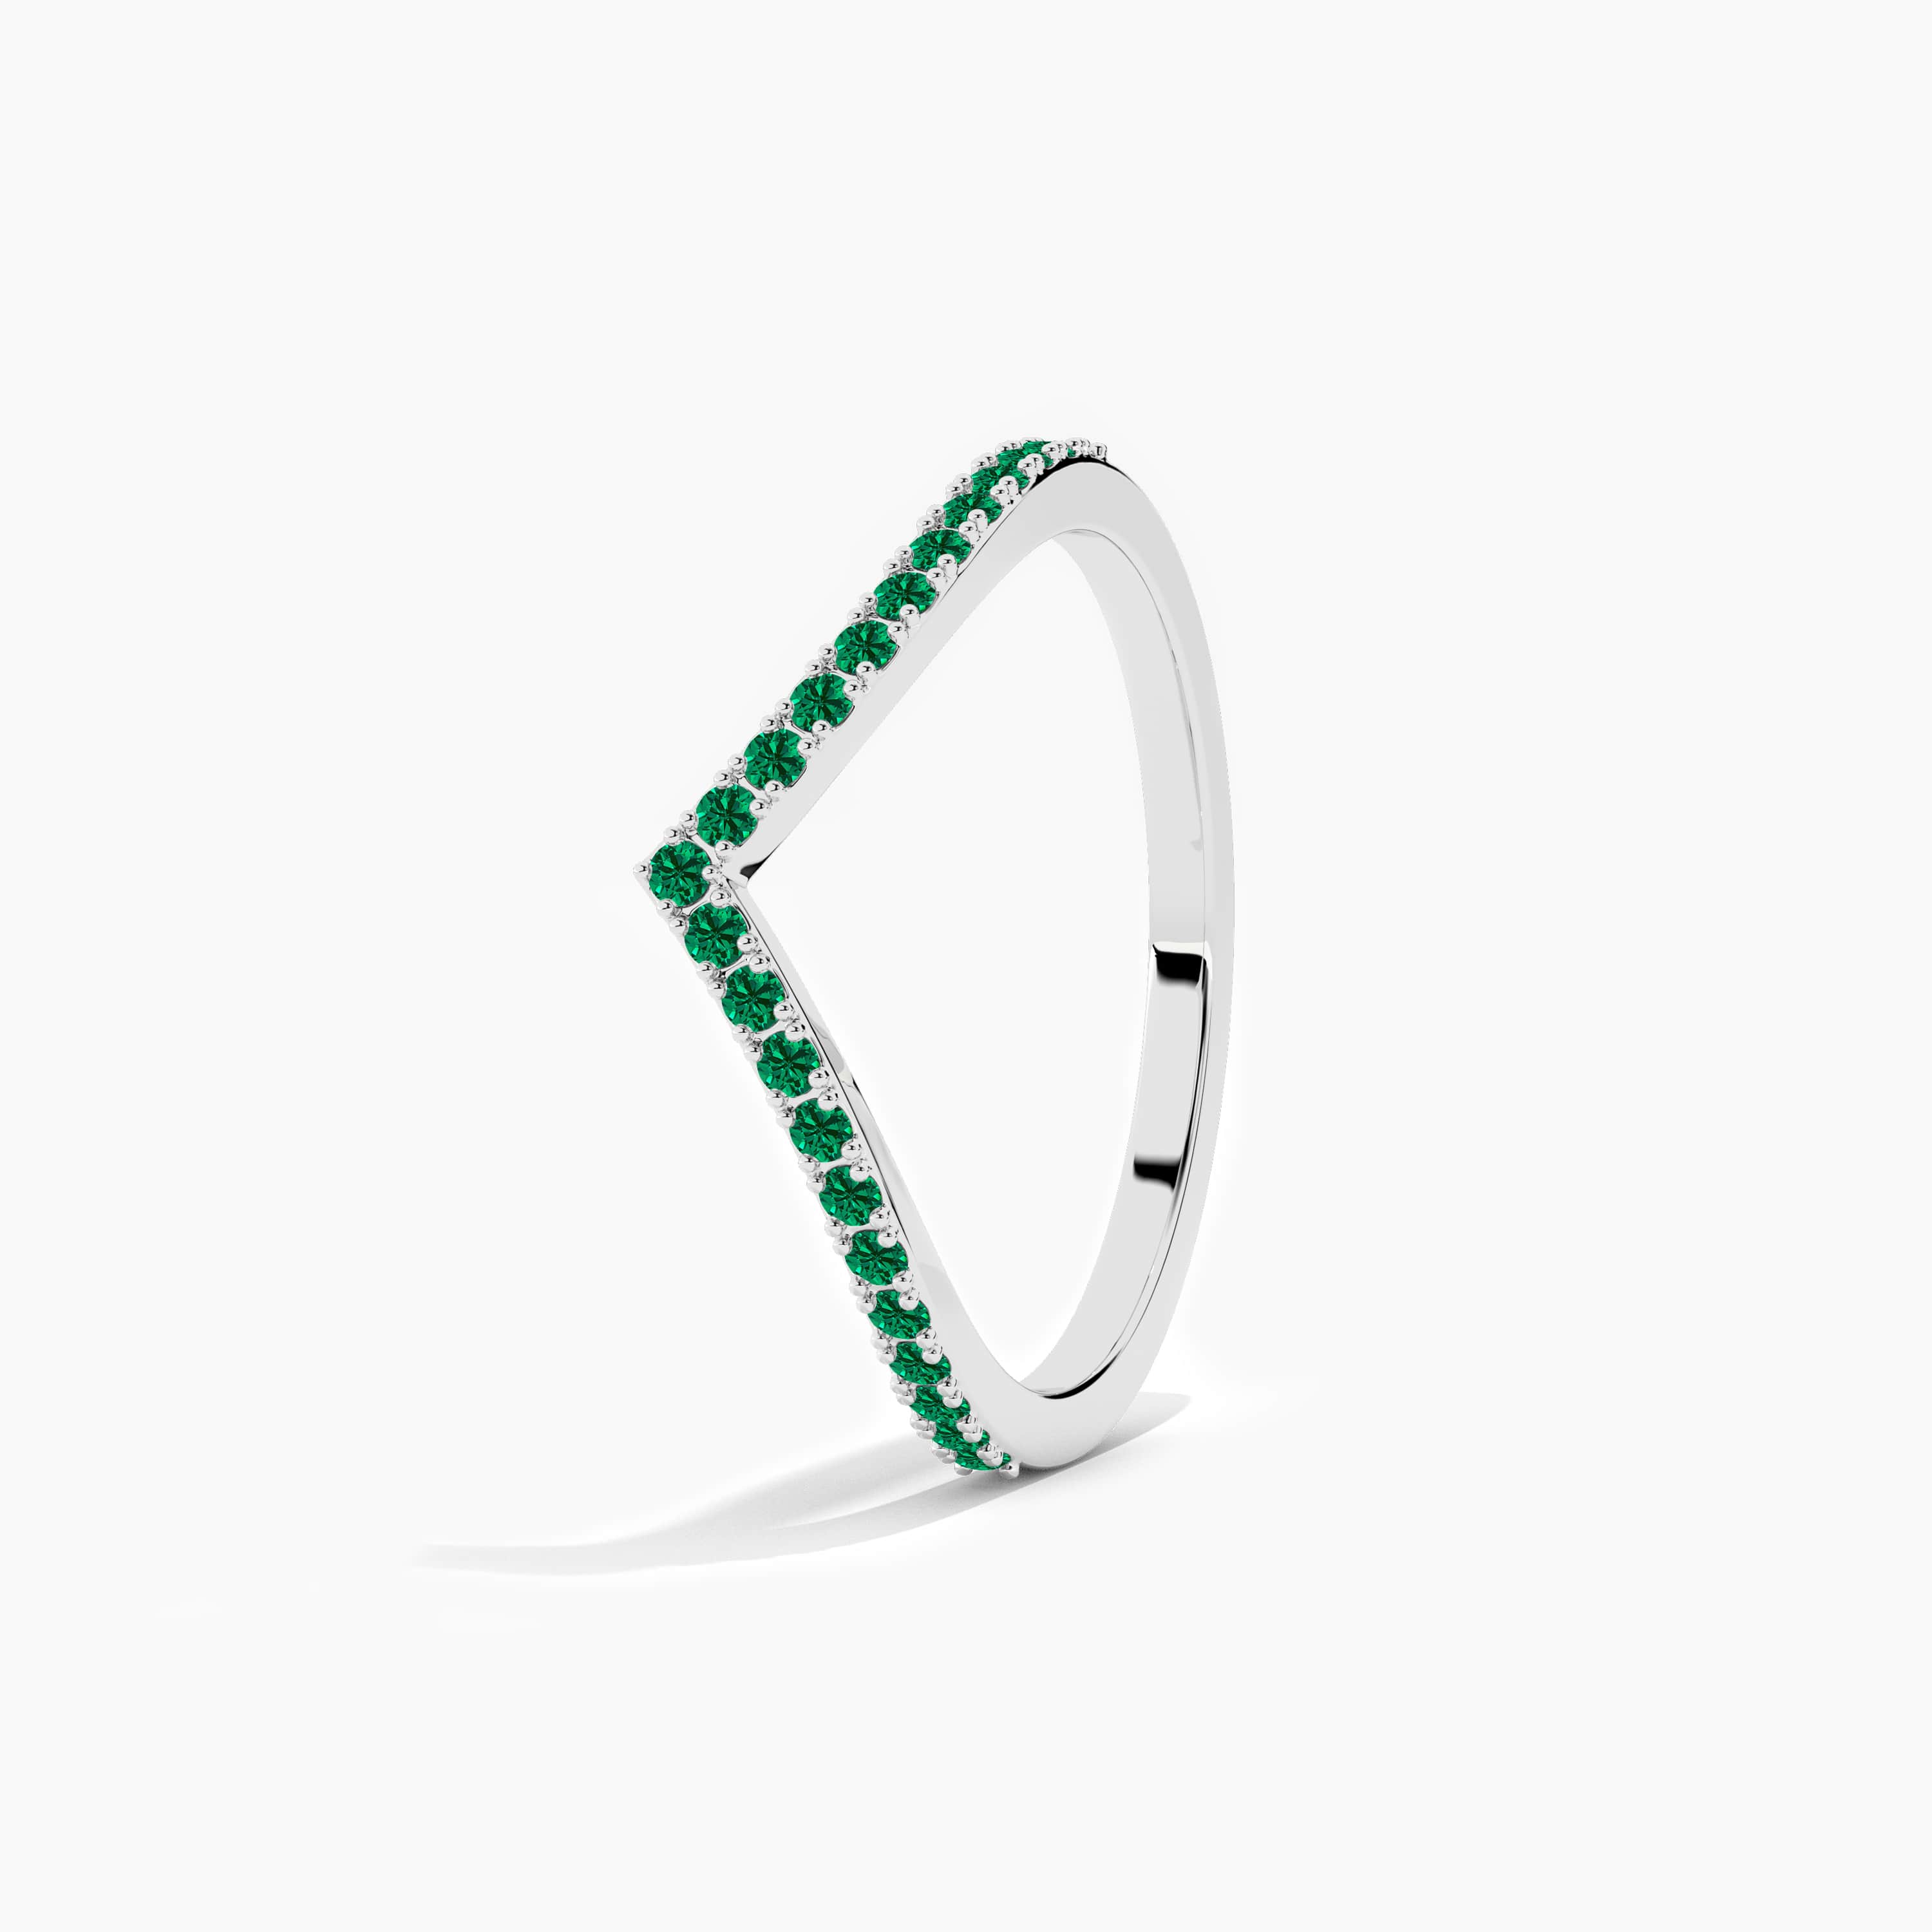 White gold curved ring in Emerald